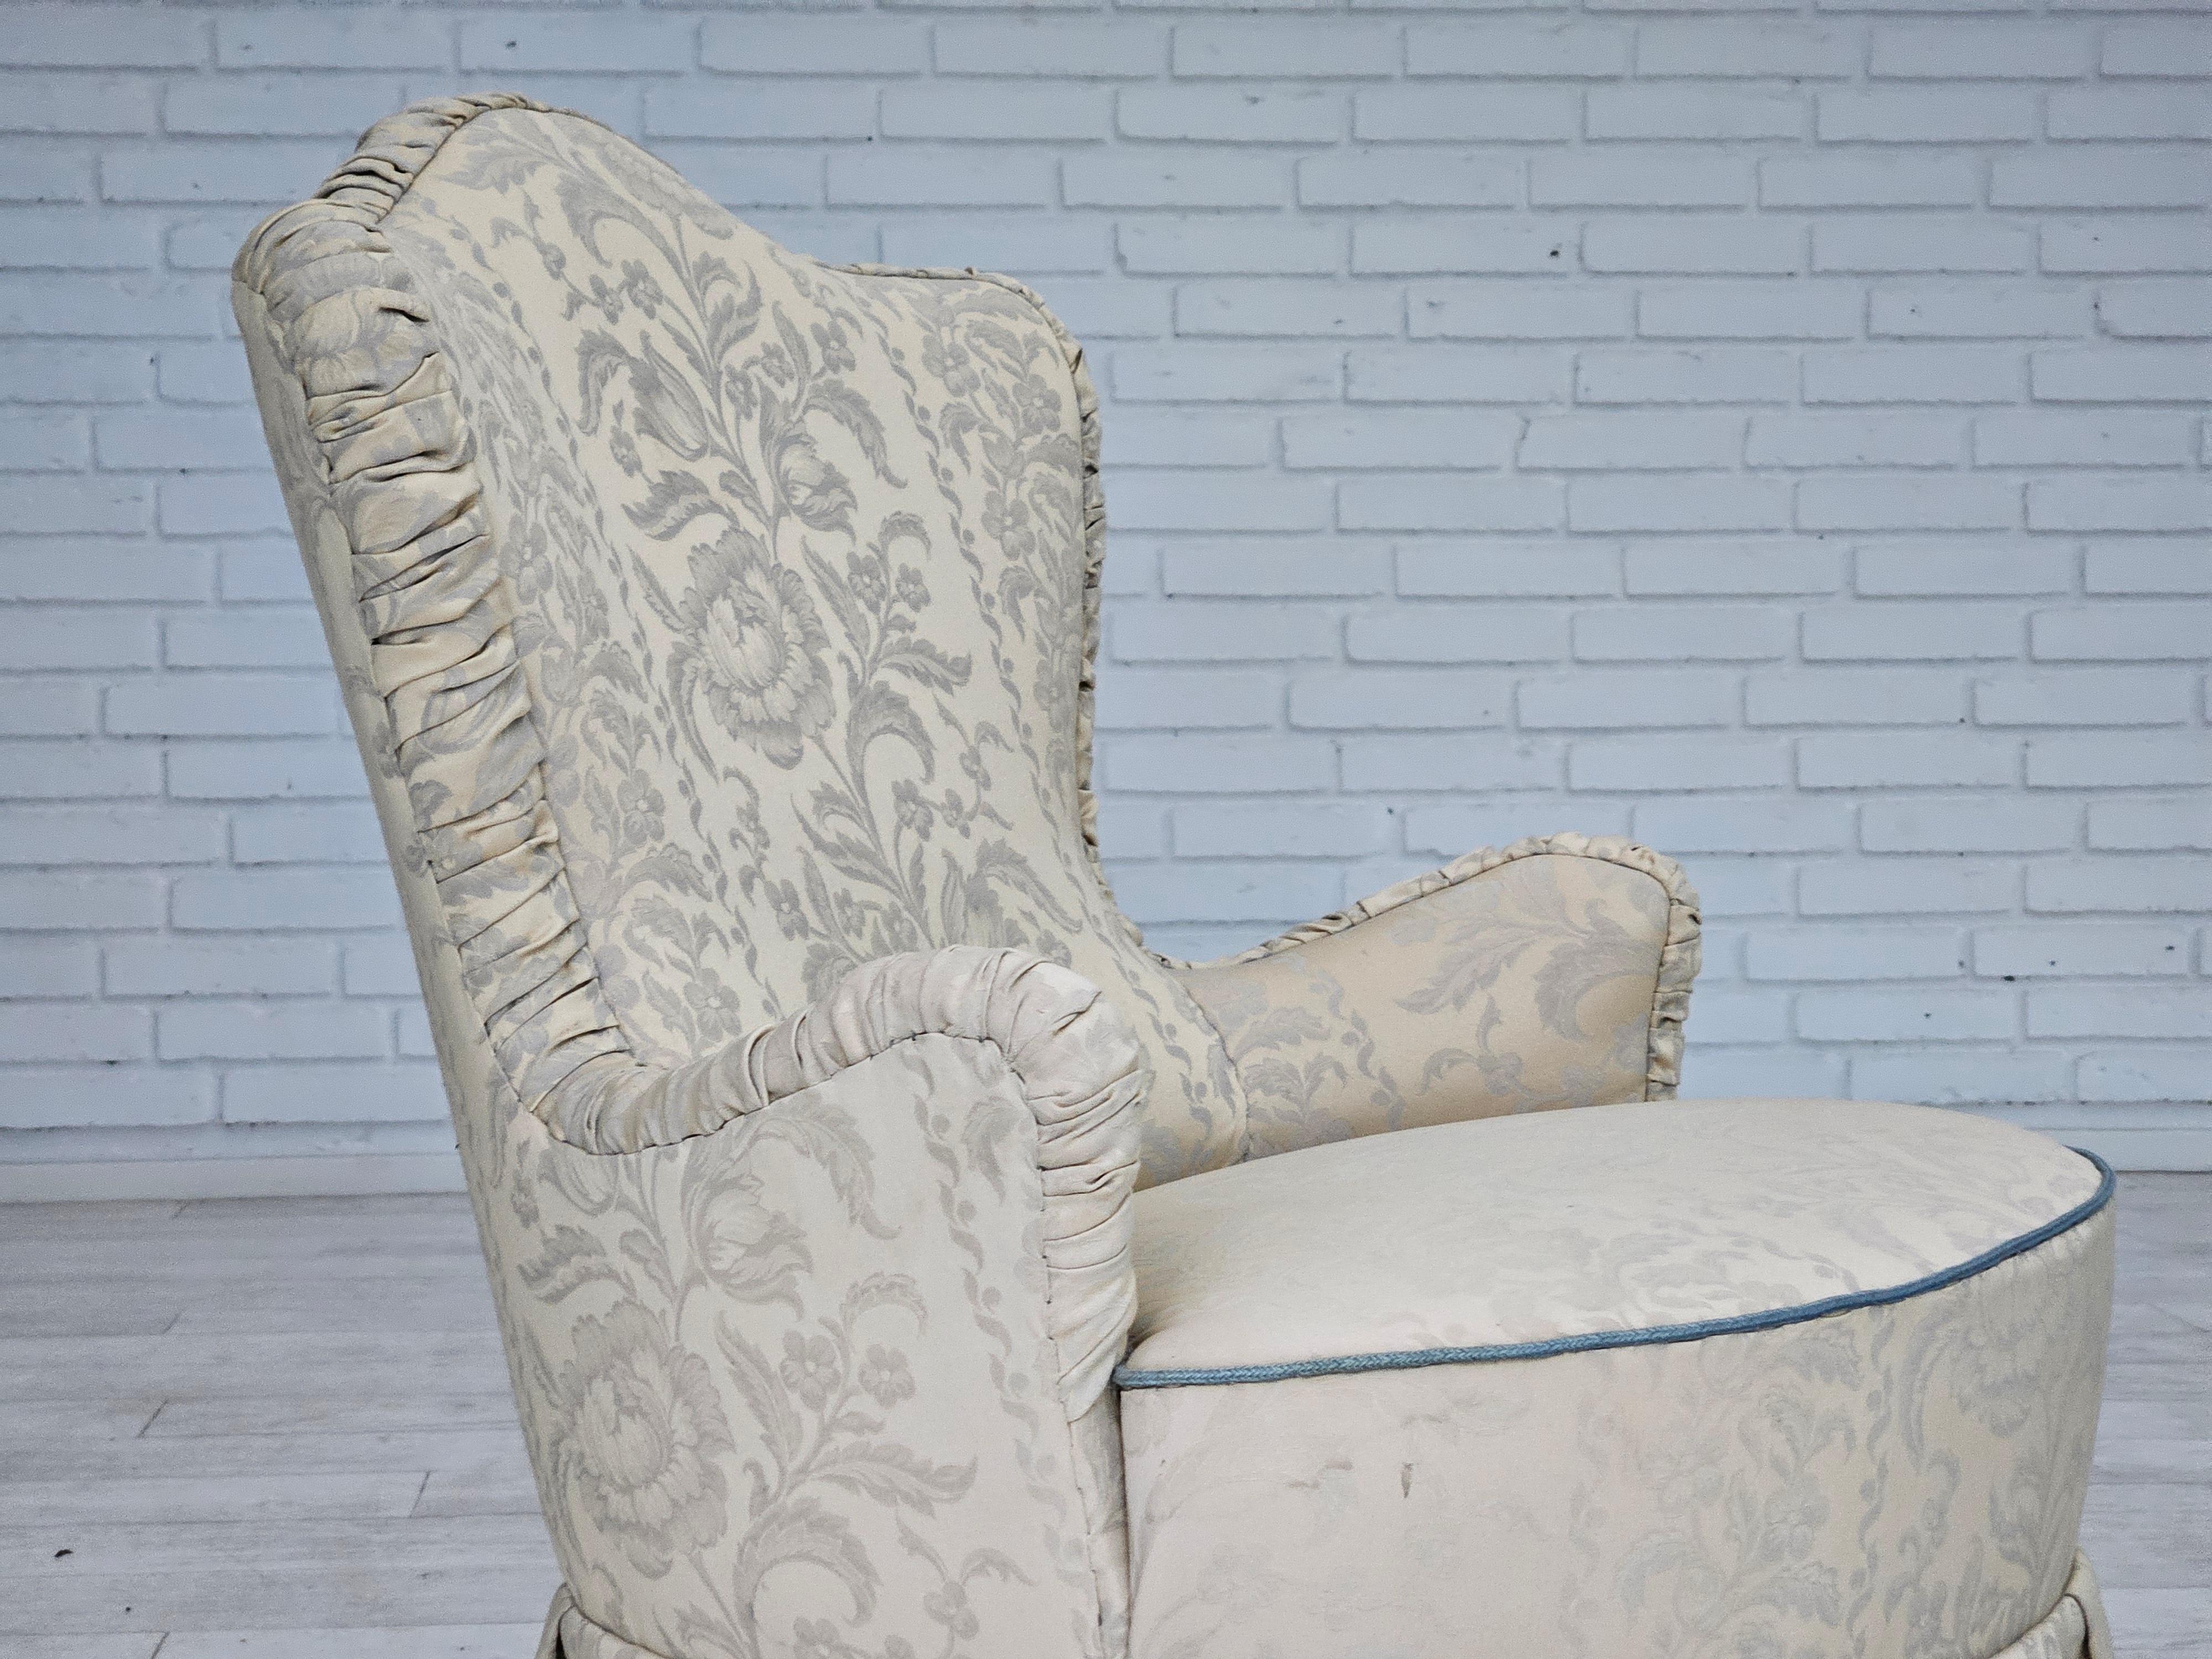 Danois 1950s, fauteuil Whiting, reupholstered, creamy/white floral fabric. en vente